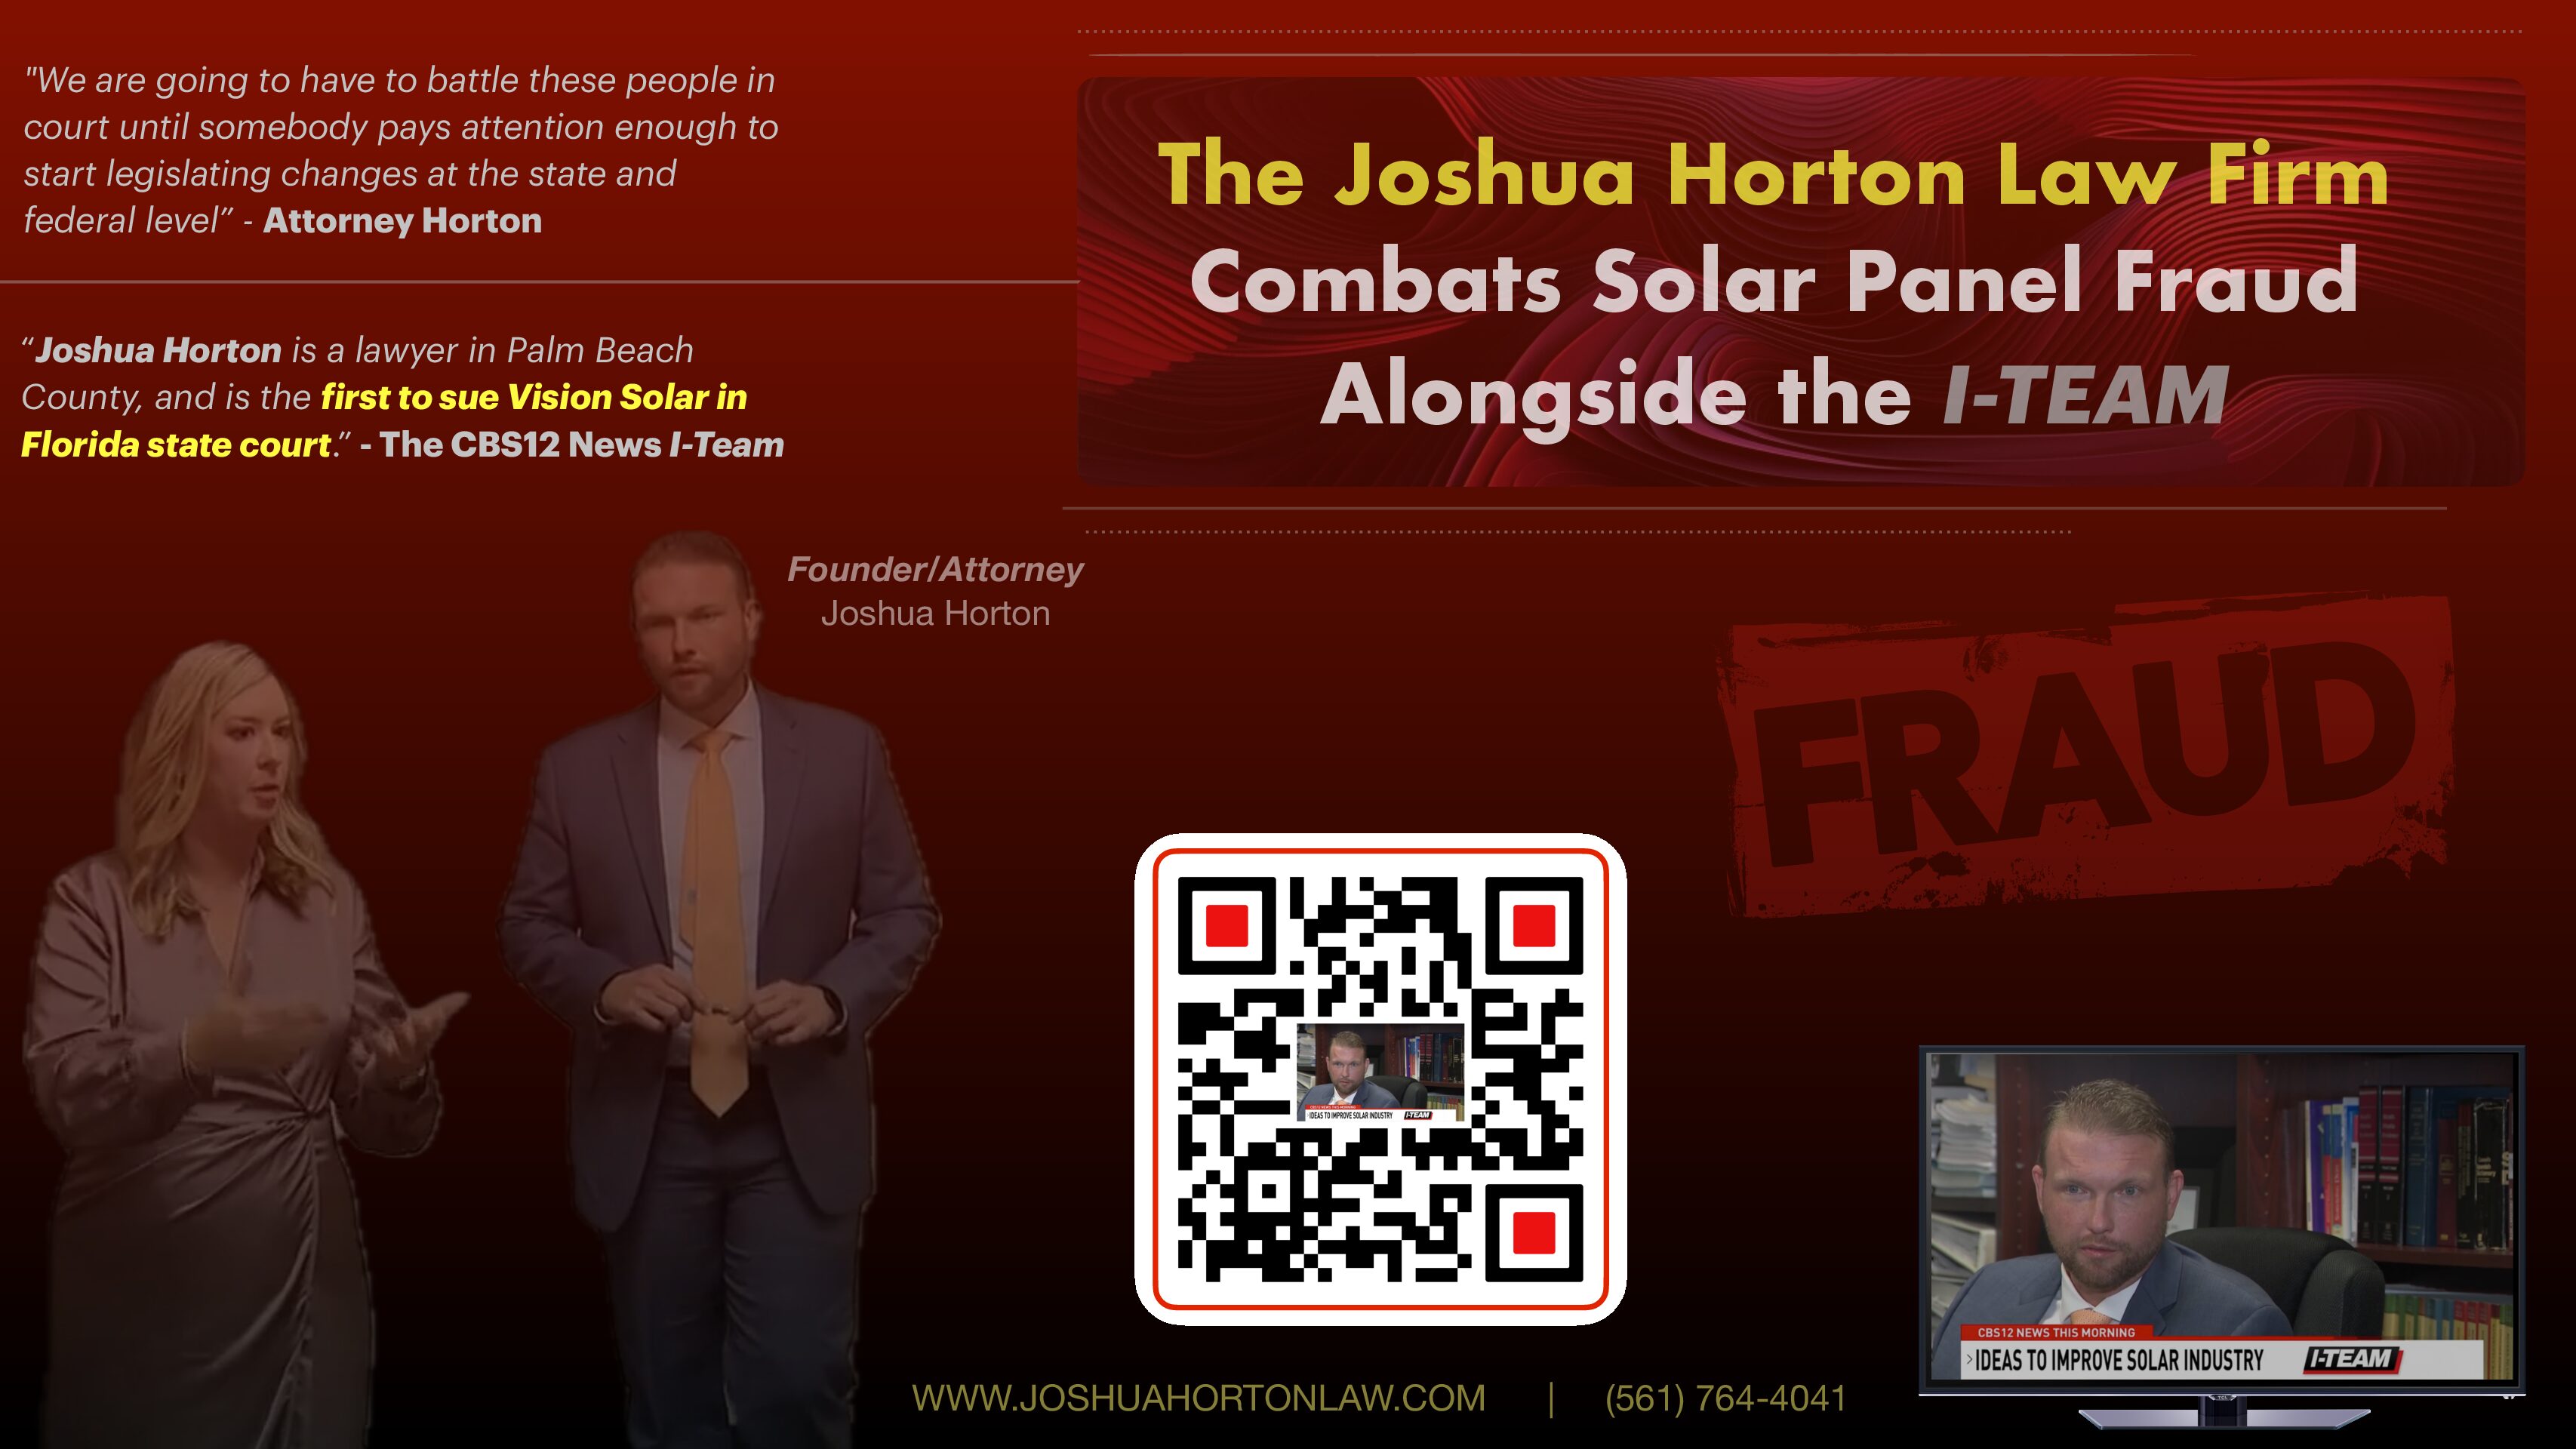 The Joshua Horton Law Firm and the I-TEAM Combat Solar Fraud in Florida